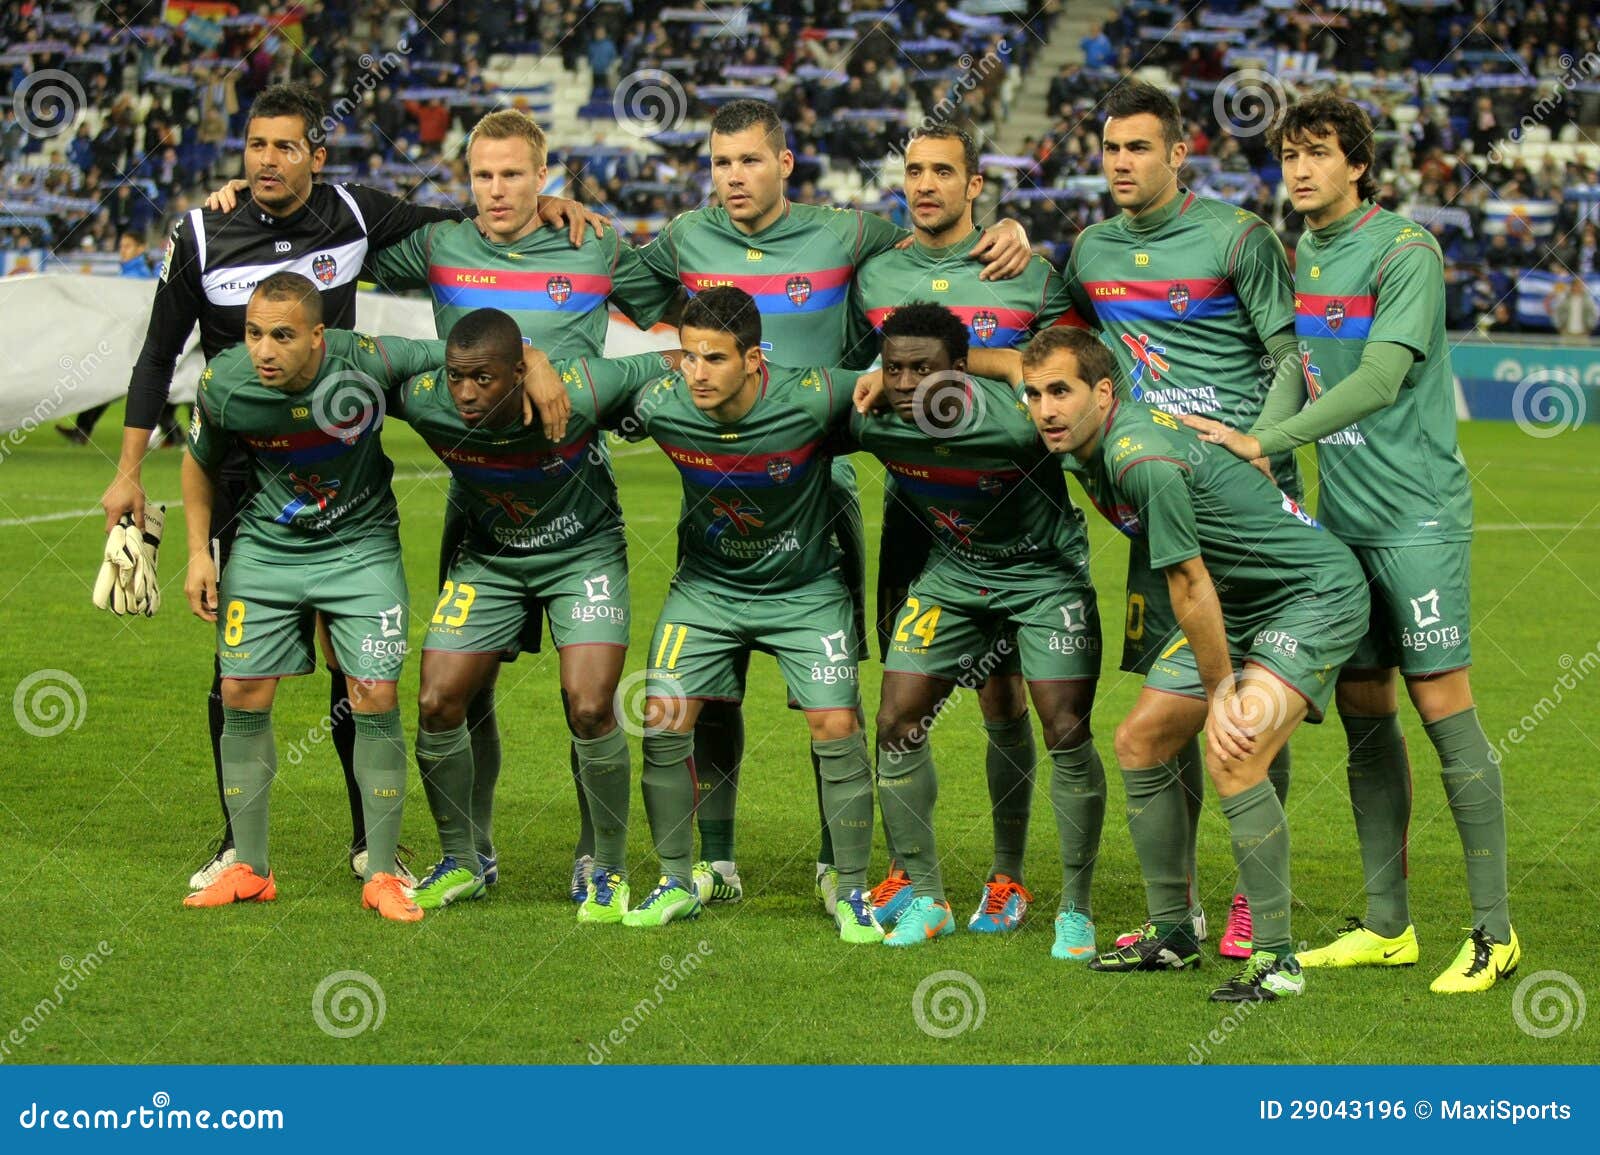 Levante UD wallpapers, Levante UD football shirt, Levante UD stadium, Levante UD football club 